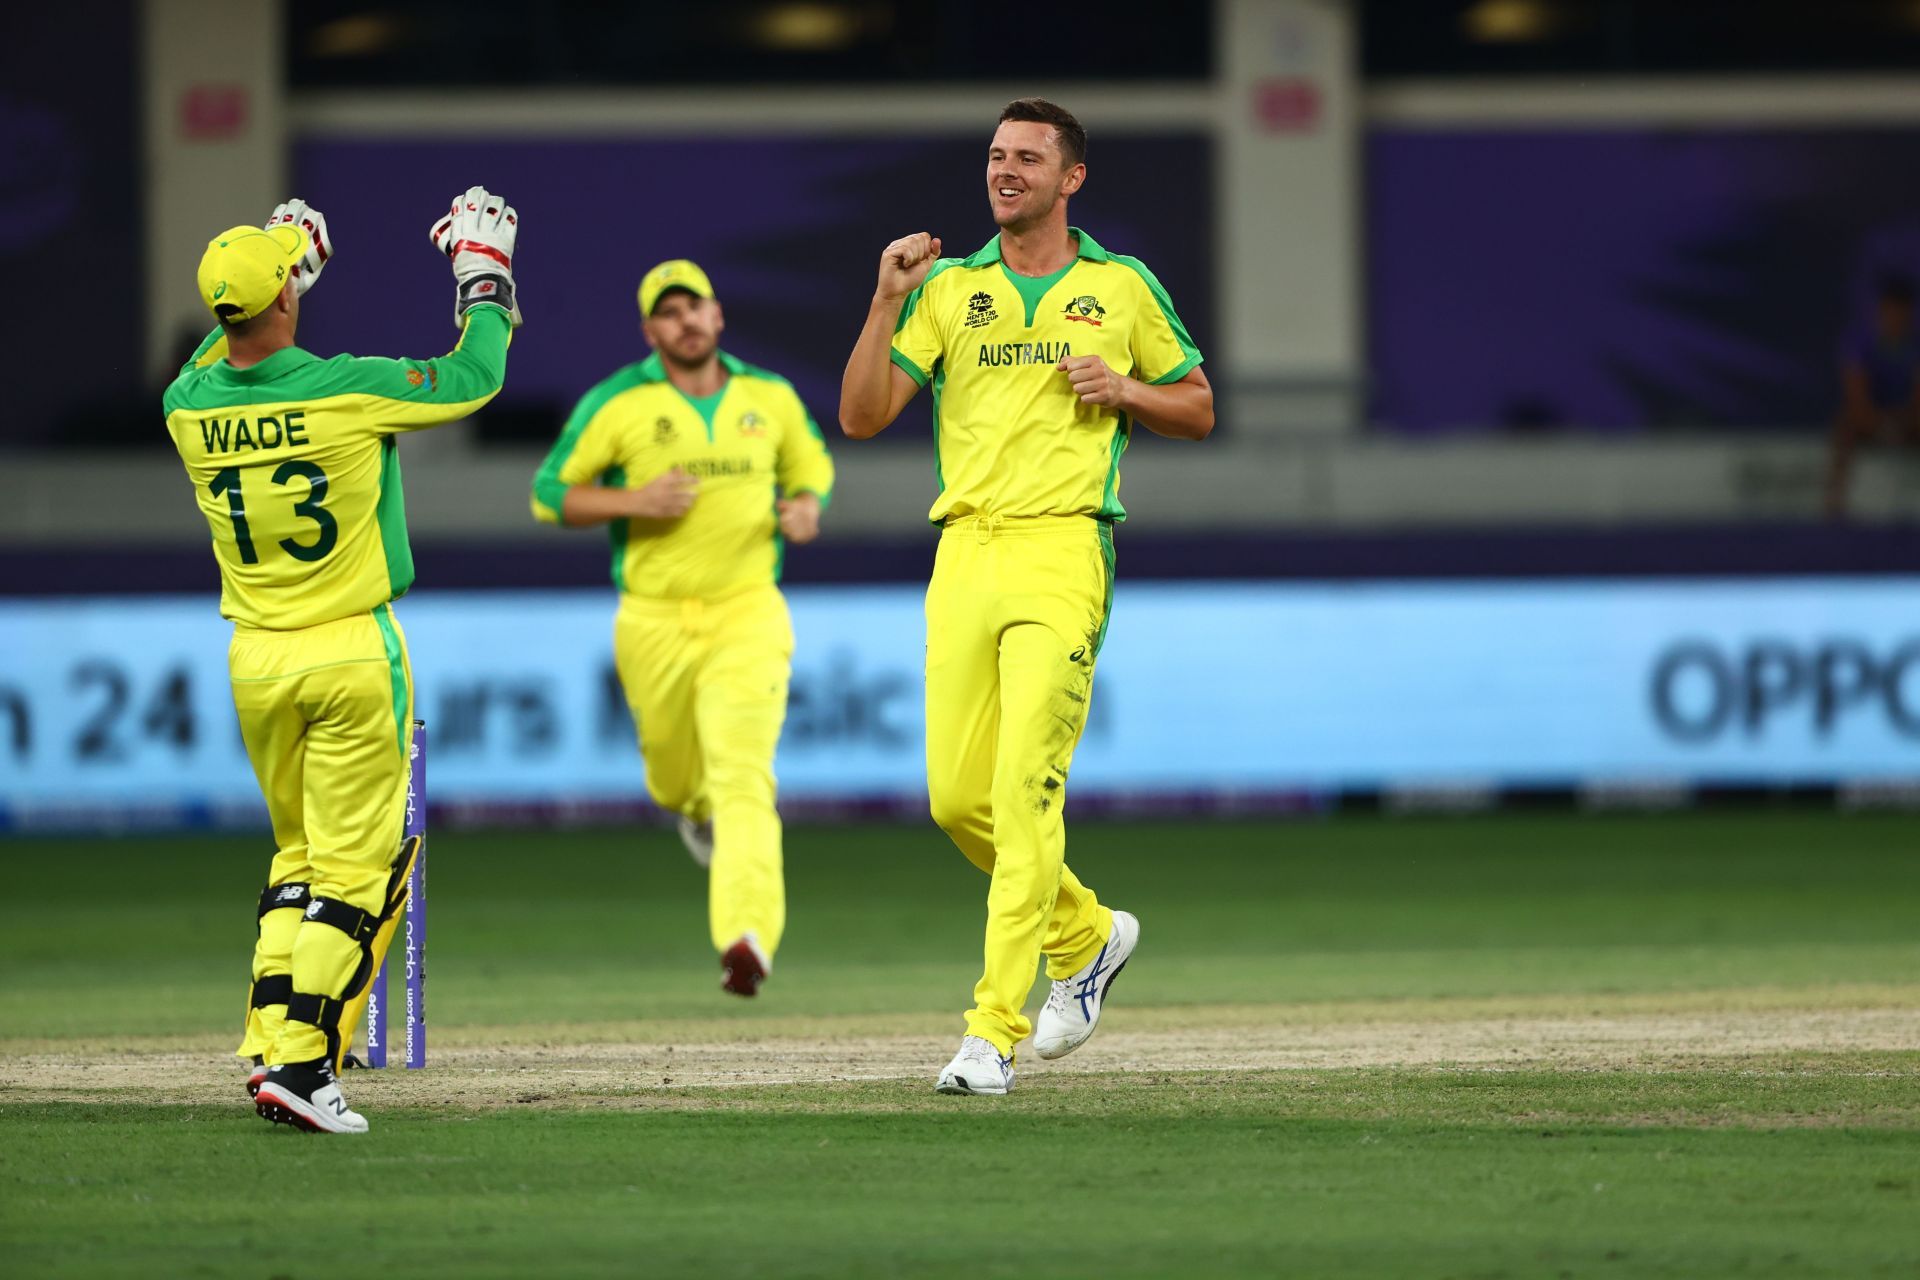 Hazlewood stepped up in the T20 World Cup